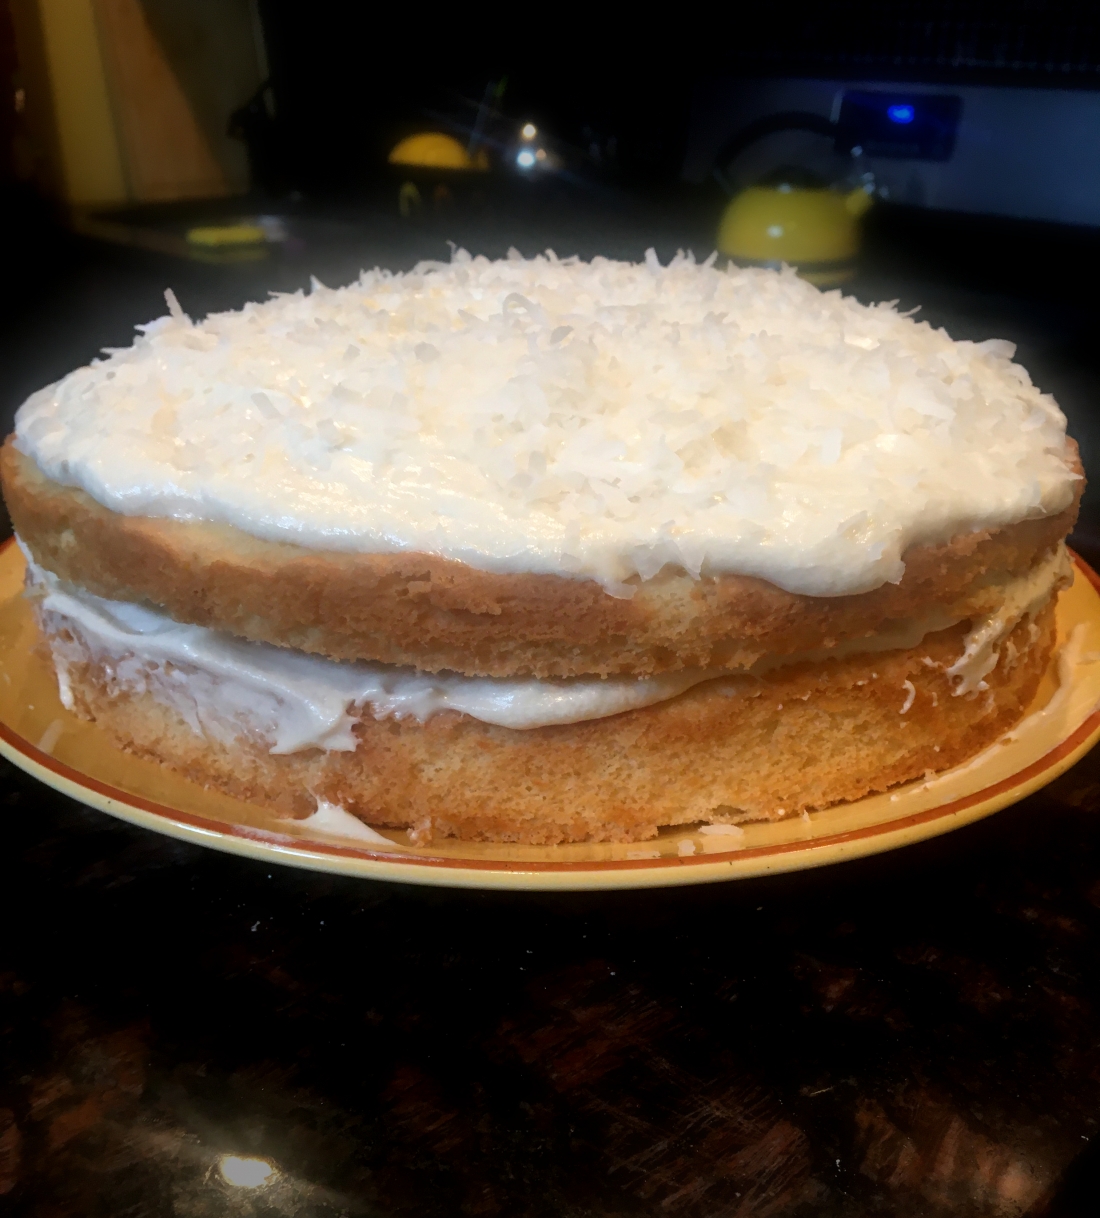 Coconut cake with buttercream by Kathryn